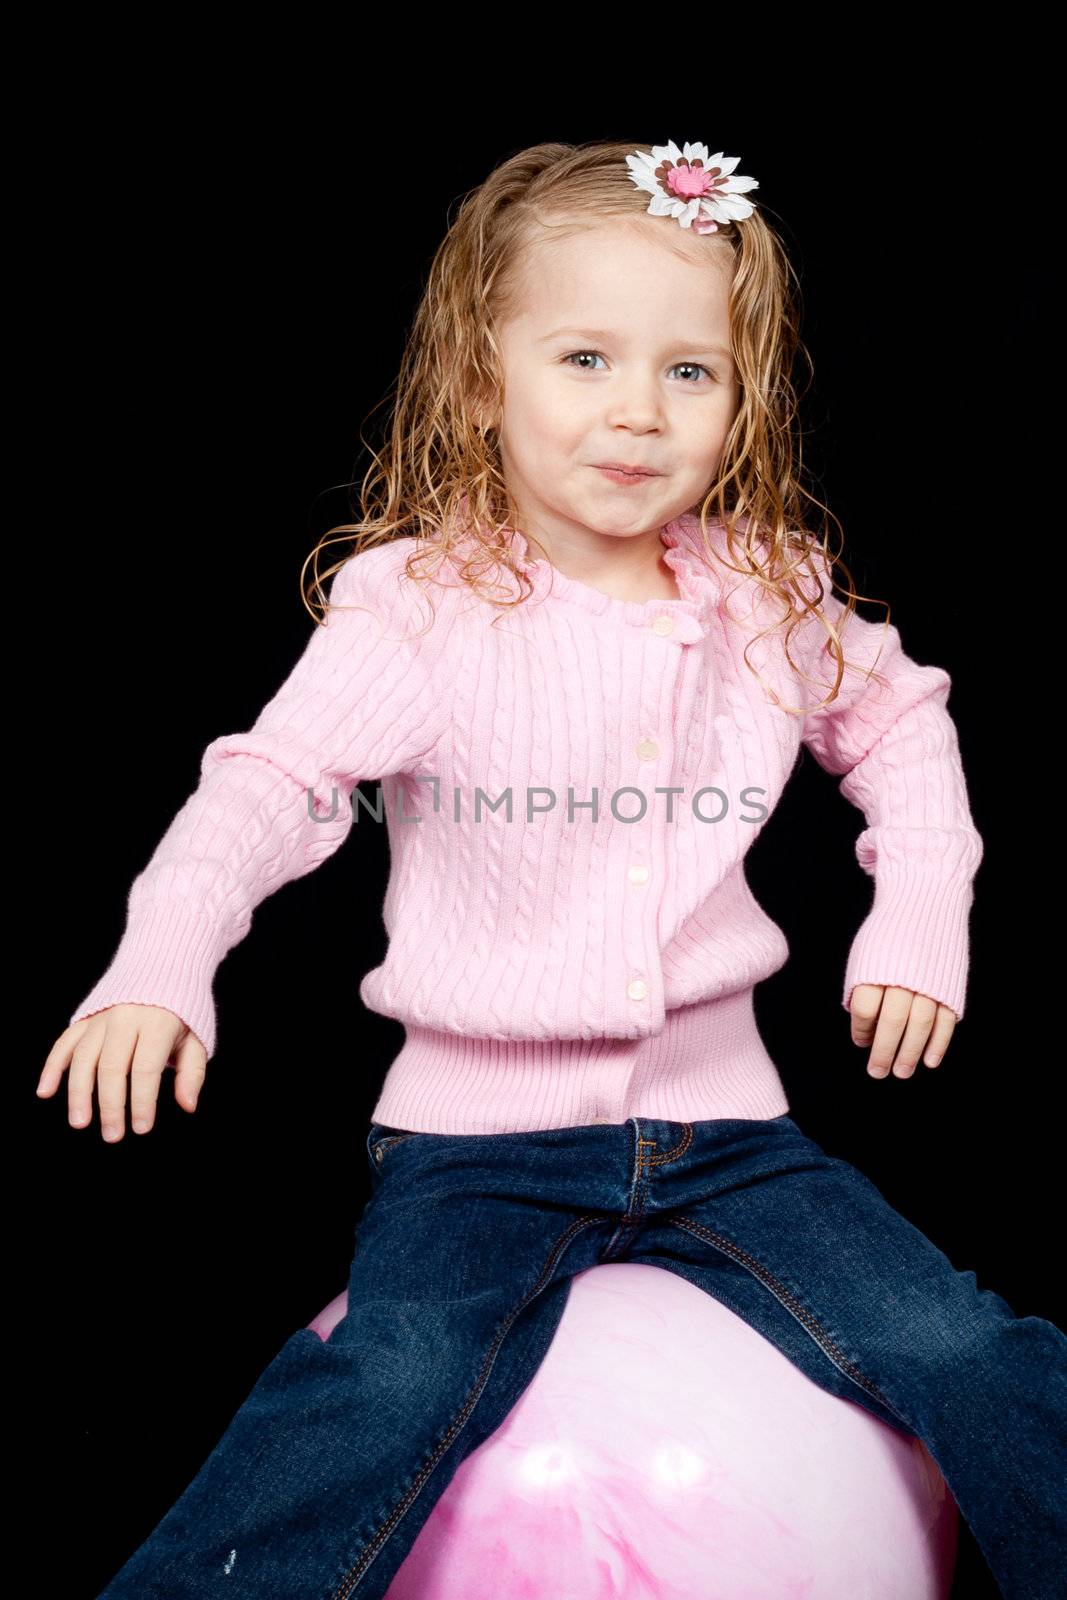 A cute child exercising on a pink ball.  She has a look of excitement and happiness on her face.